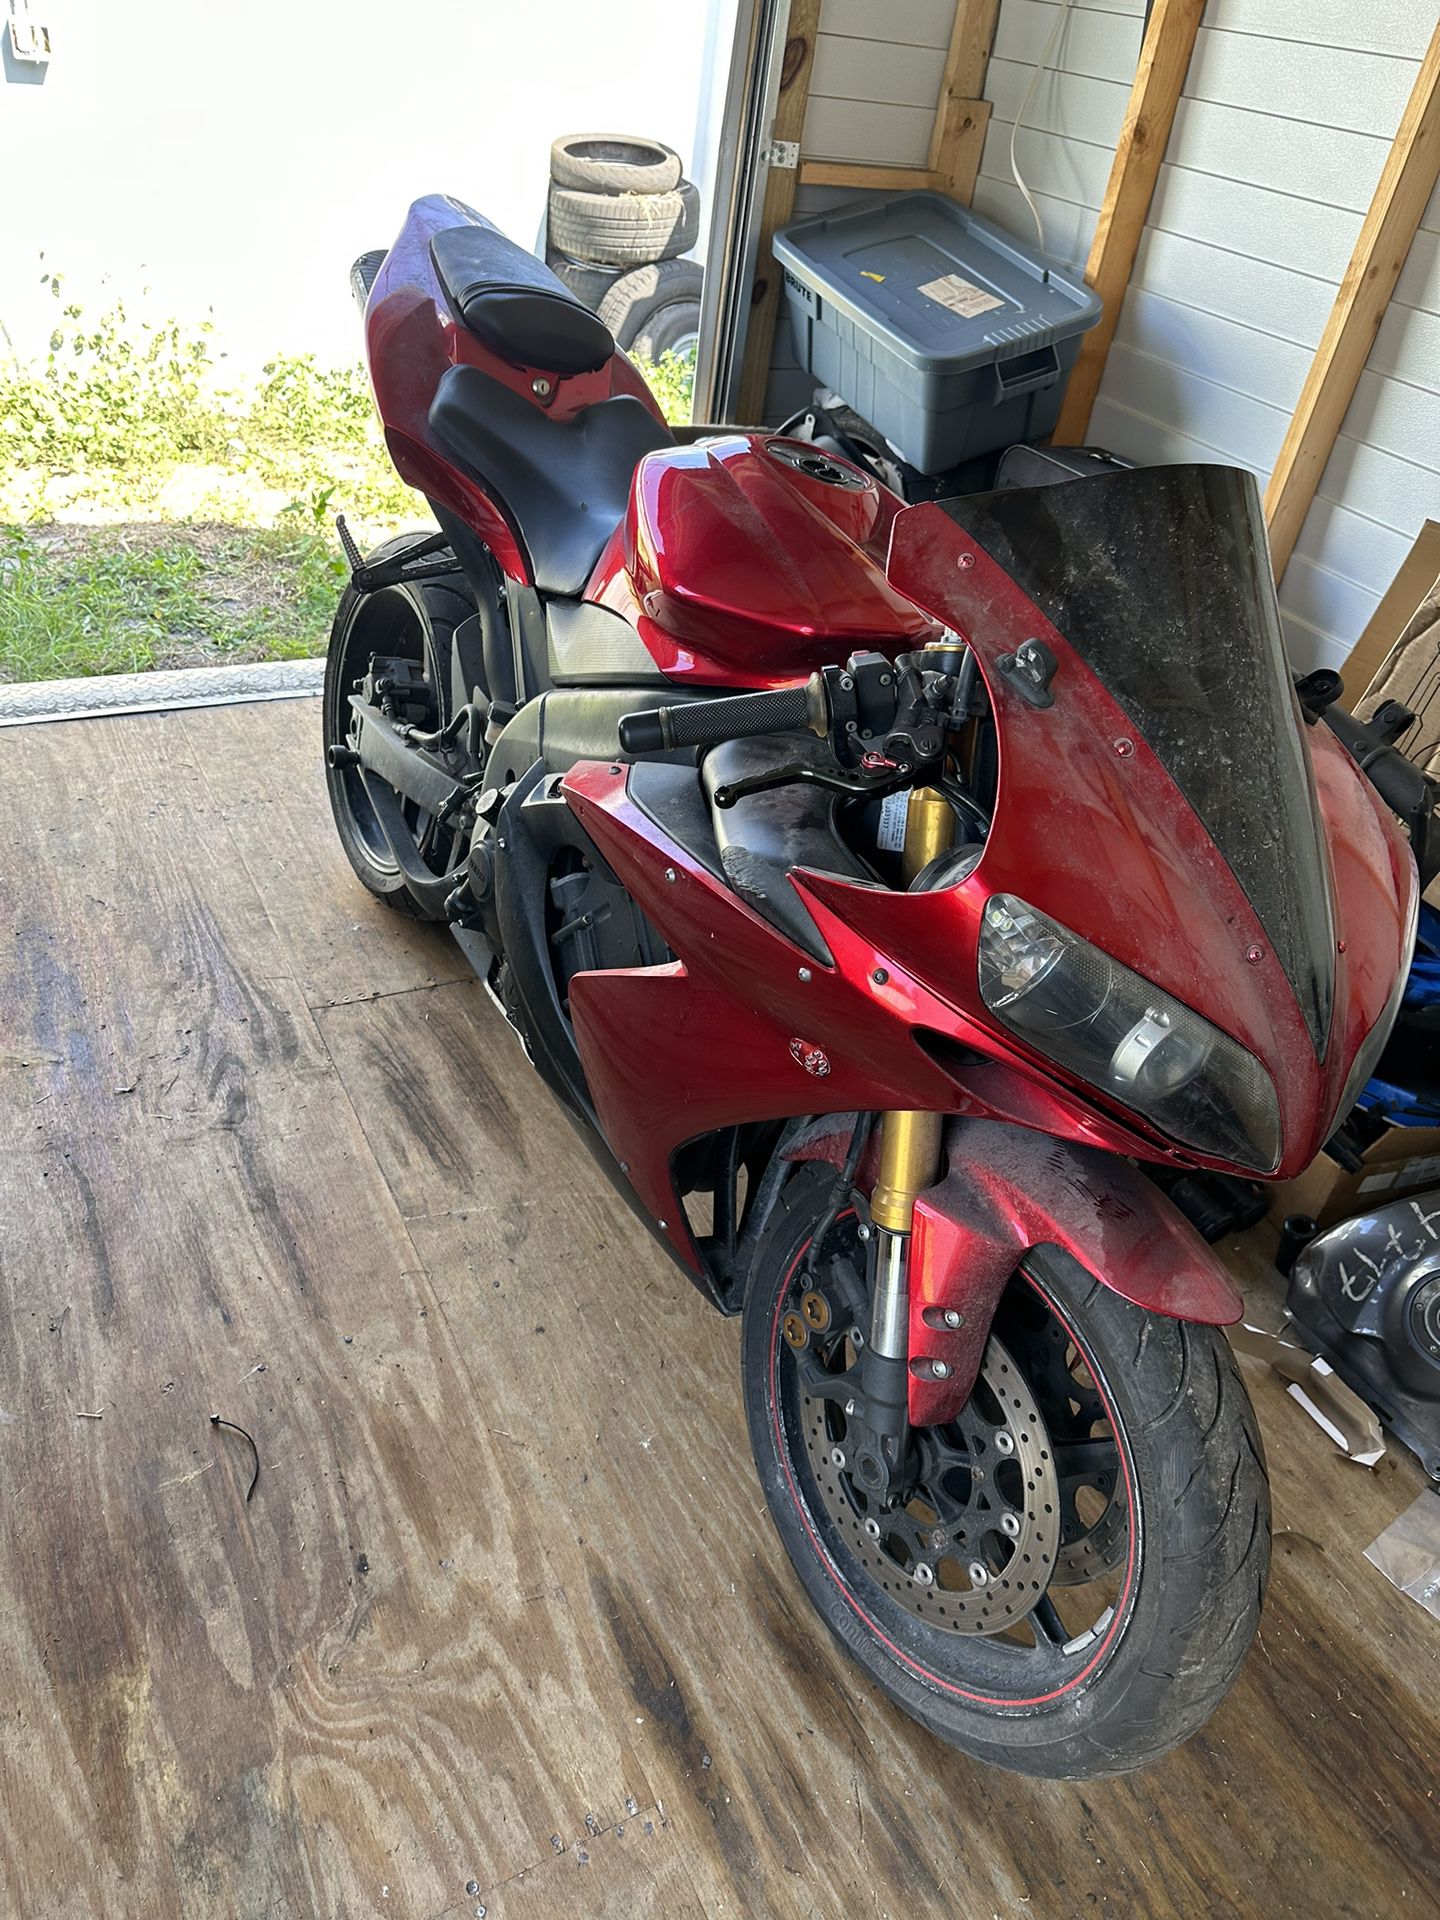 2006 Yamaha R1 Parts for Sale in Pembroke Pines, - OfferUp